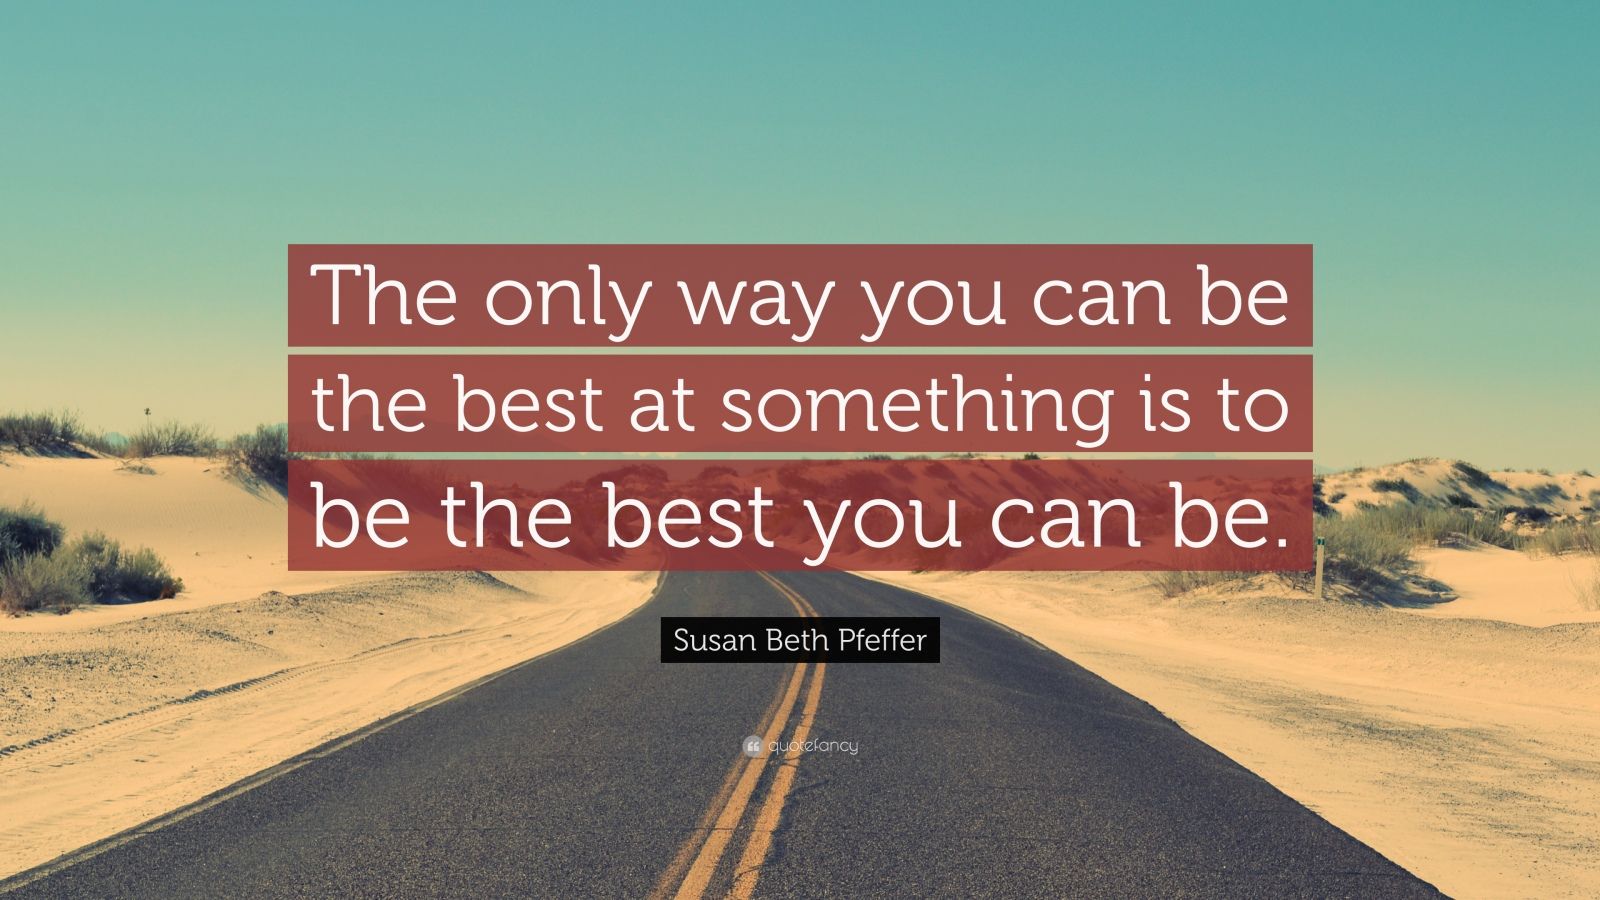 Susan Beth Pfeffer Quote: “The only way you can be the best at ...